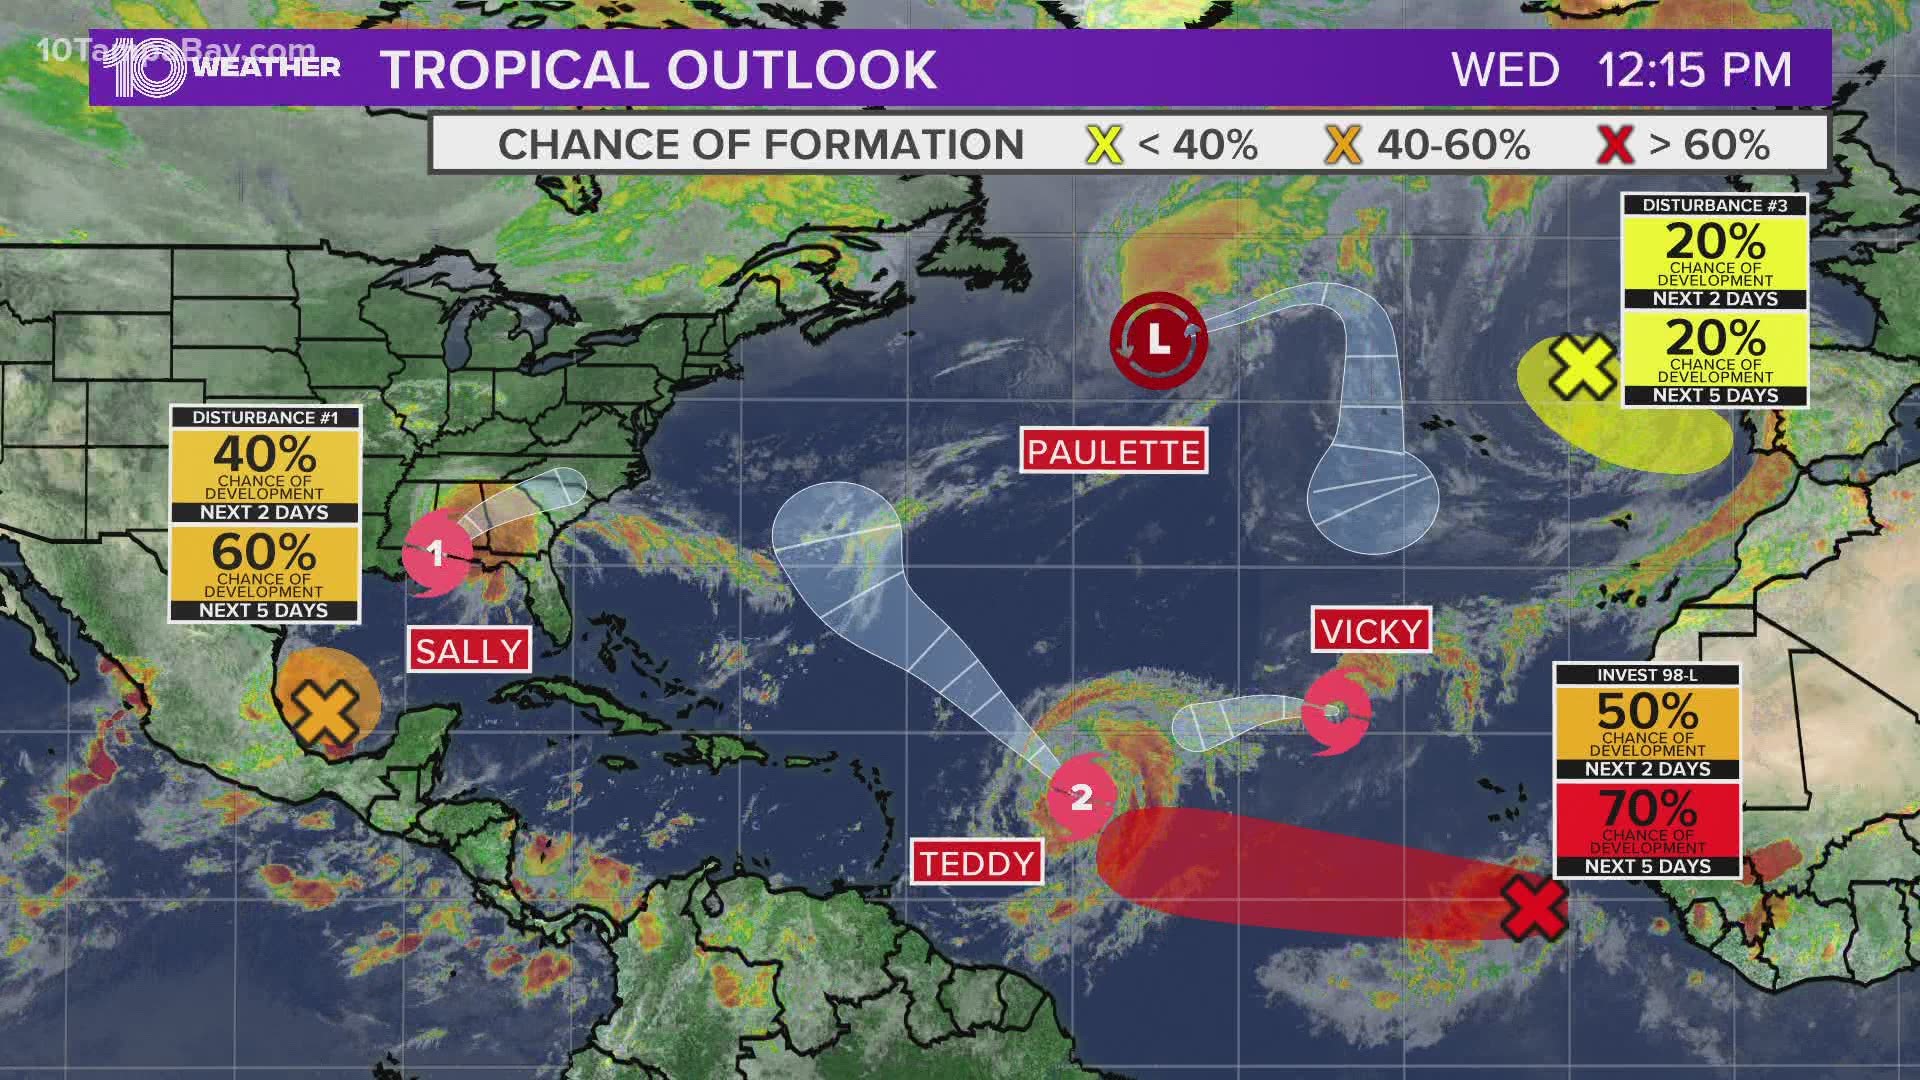 There are two hurricanes, one tropical storm and one post-tropical storm churning in the Atlantic at one time.